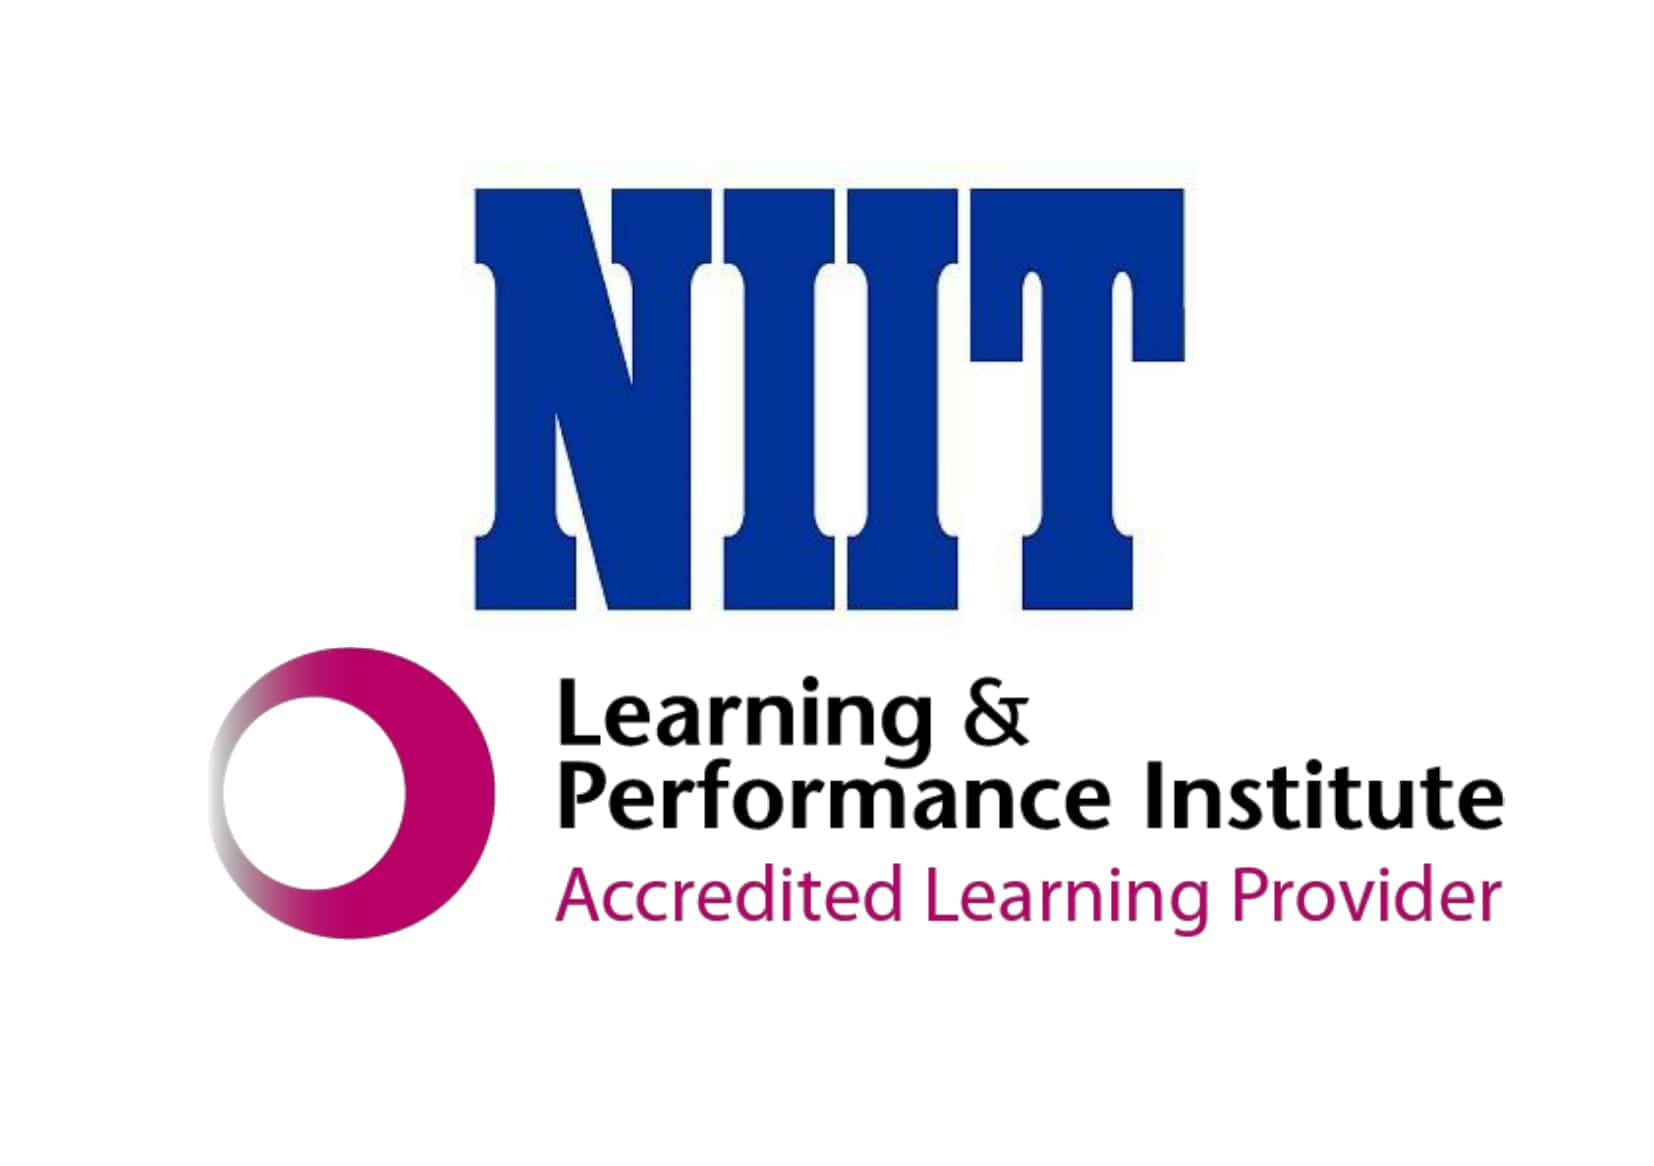 Established in 1981, NIIT Limited, a global leader in Skills and Talent Development, offers multi-disciplinary learning management and training delivery solutions to corporations, institutions, and individuals in over 40 countries. NIIT has three main lines of business across the globe - Corporate Learning Group, Skills and Careers Group, and School Learning Group.